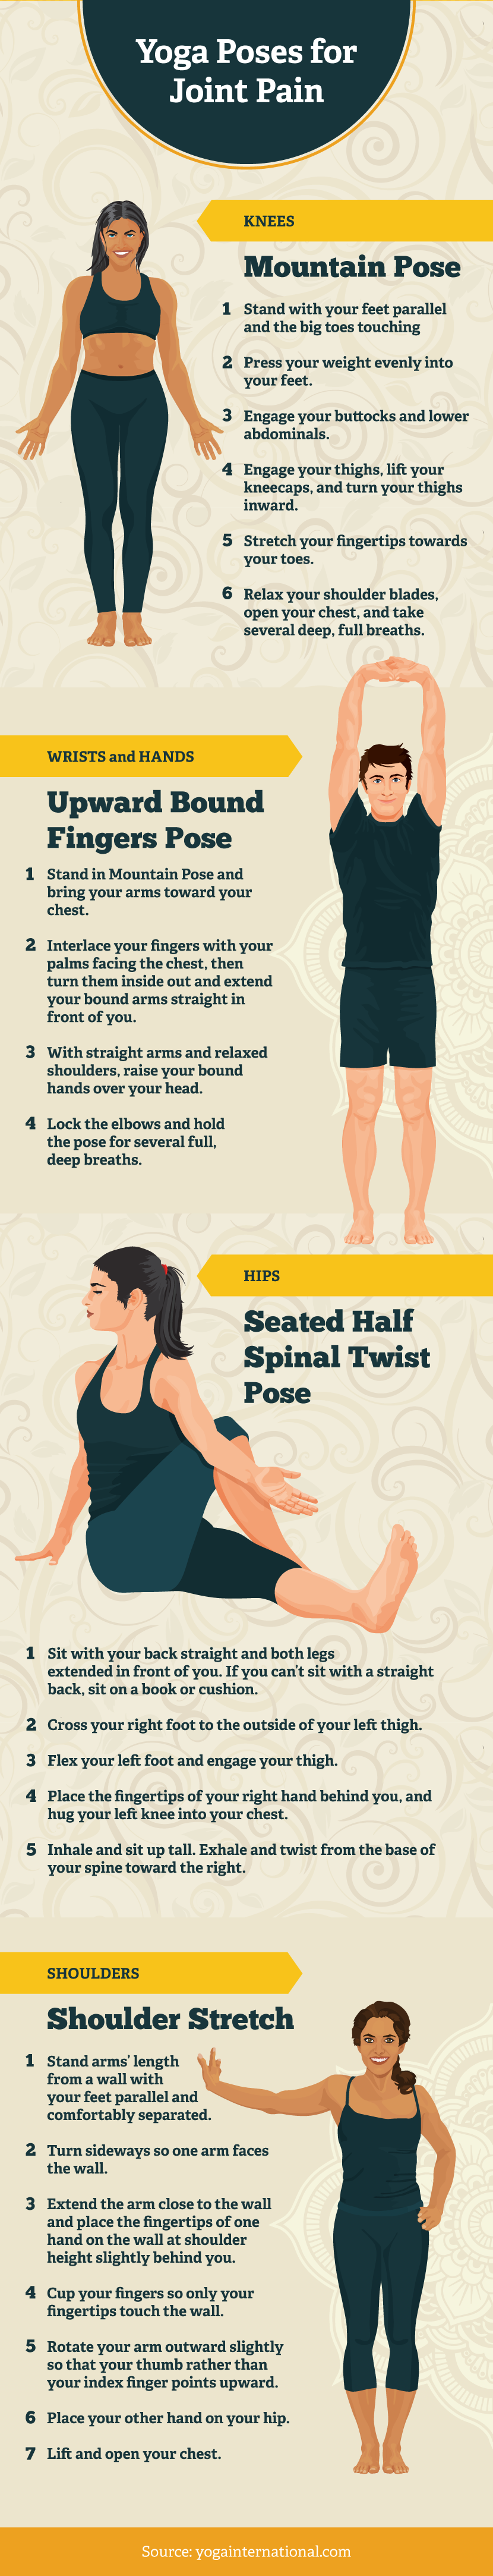 Yoga For Helping Joint Pain